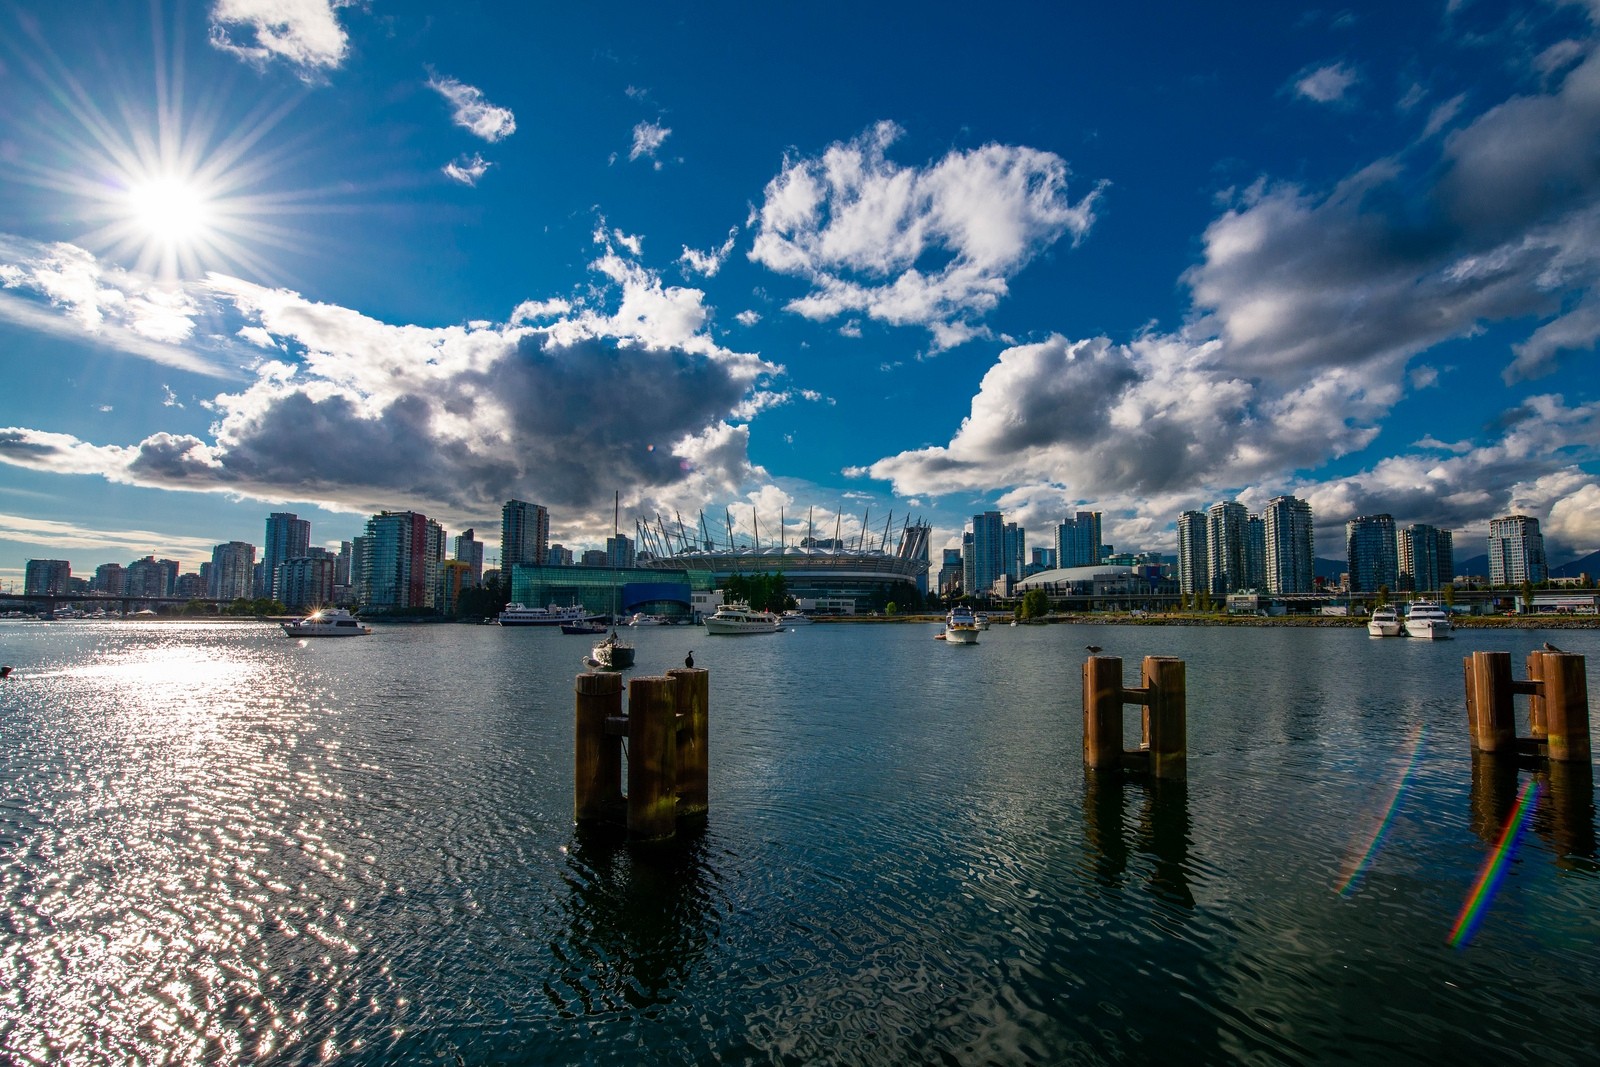 photography, Landscape, Nature, Sea, Ports, Sky, Clouds, Sun rays, City, Building, Boat, Vancouver, Canada Wallpaper